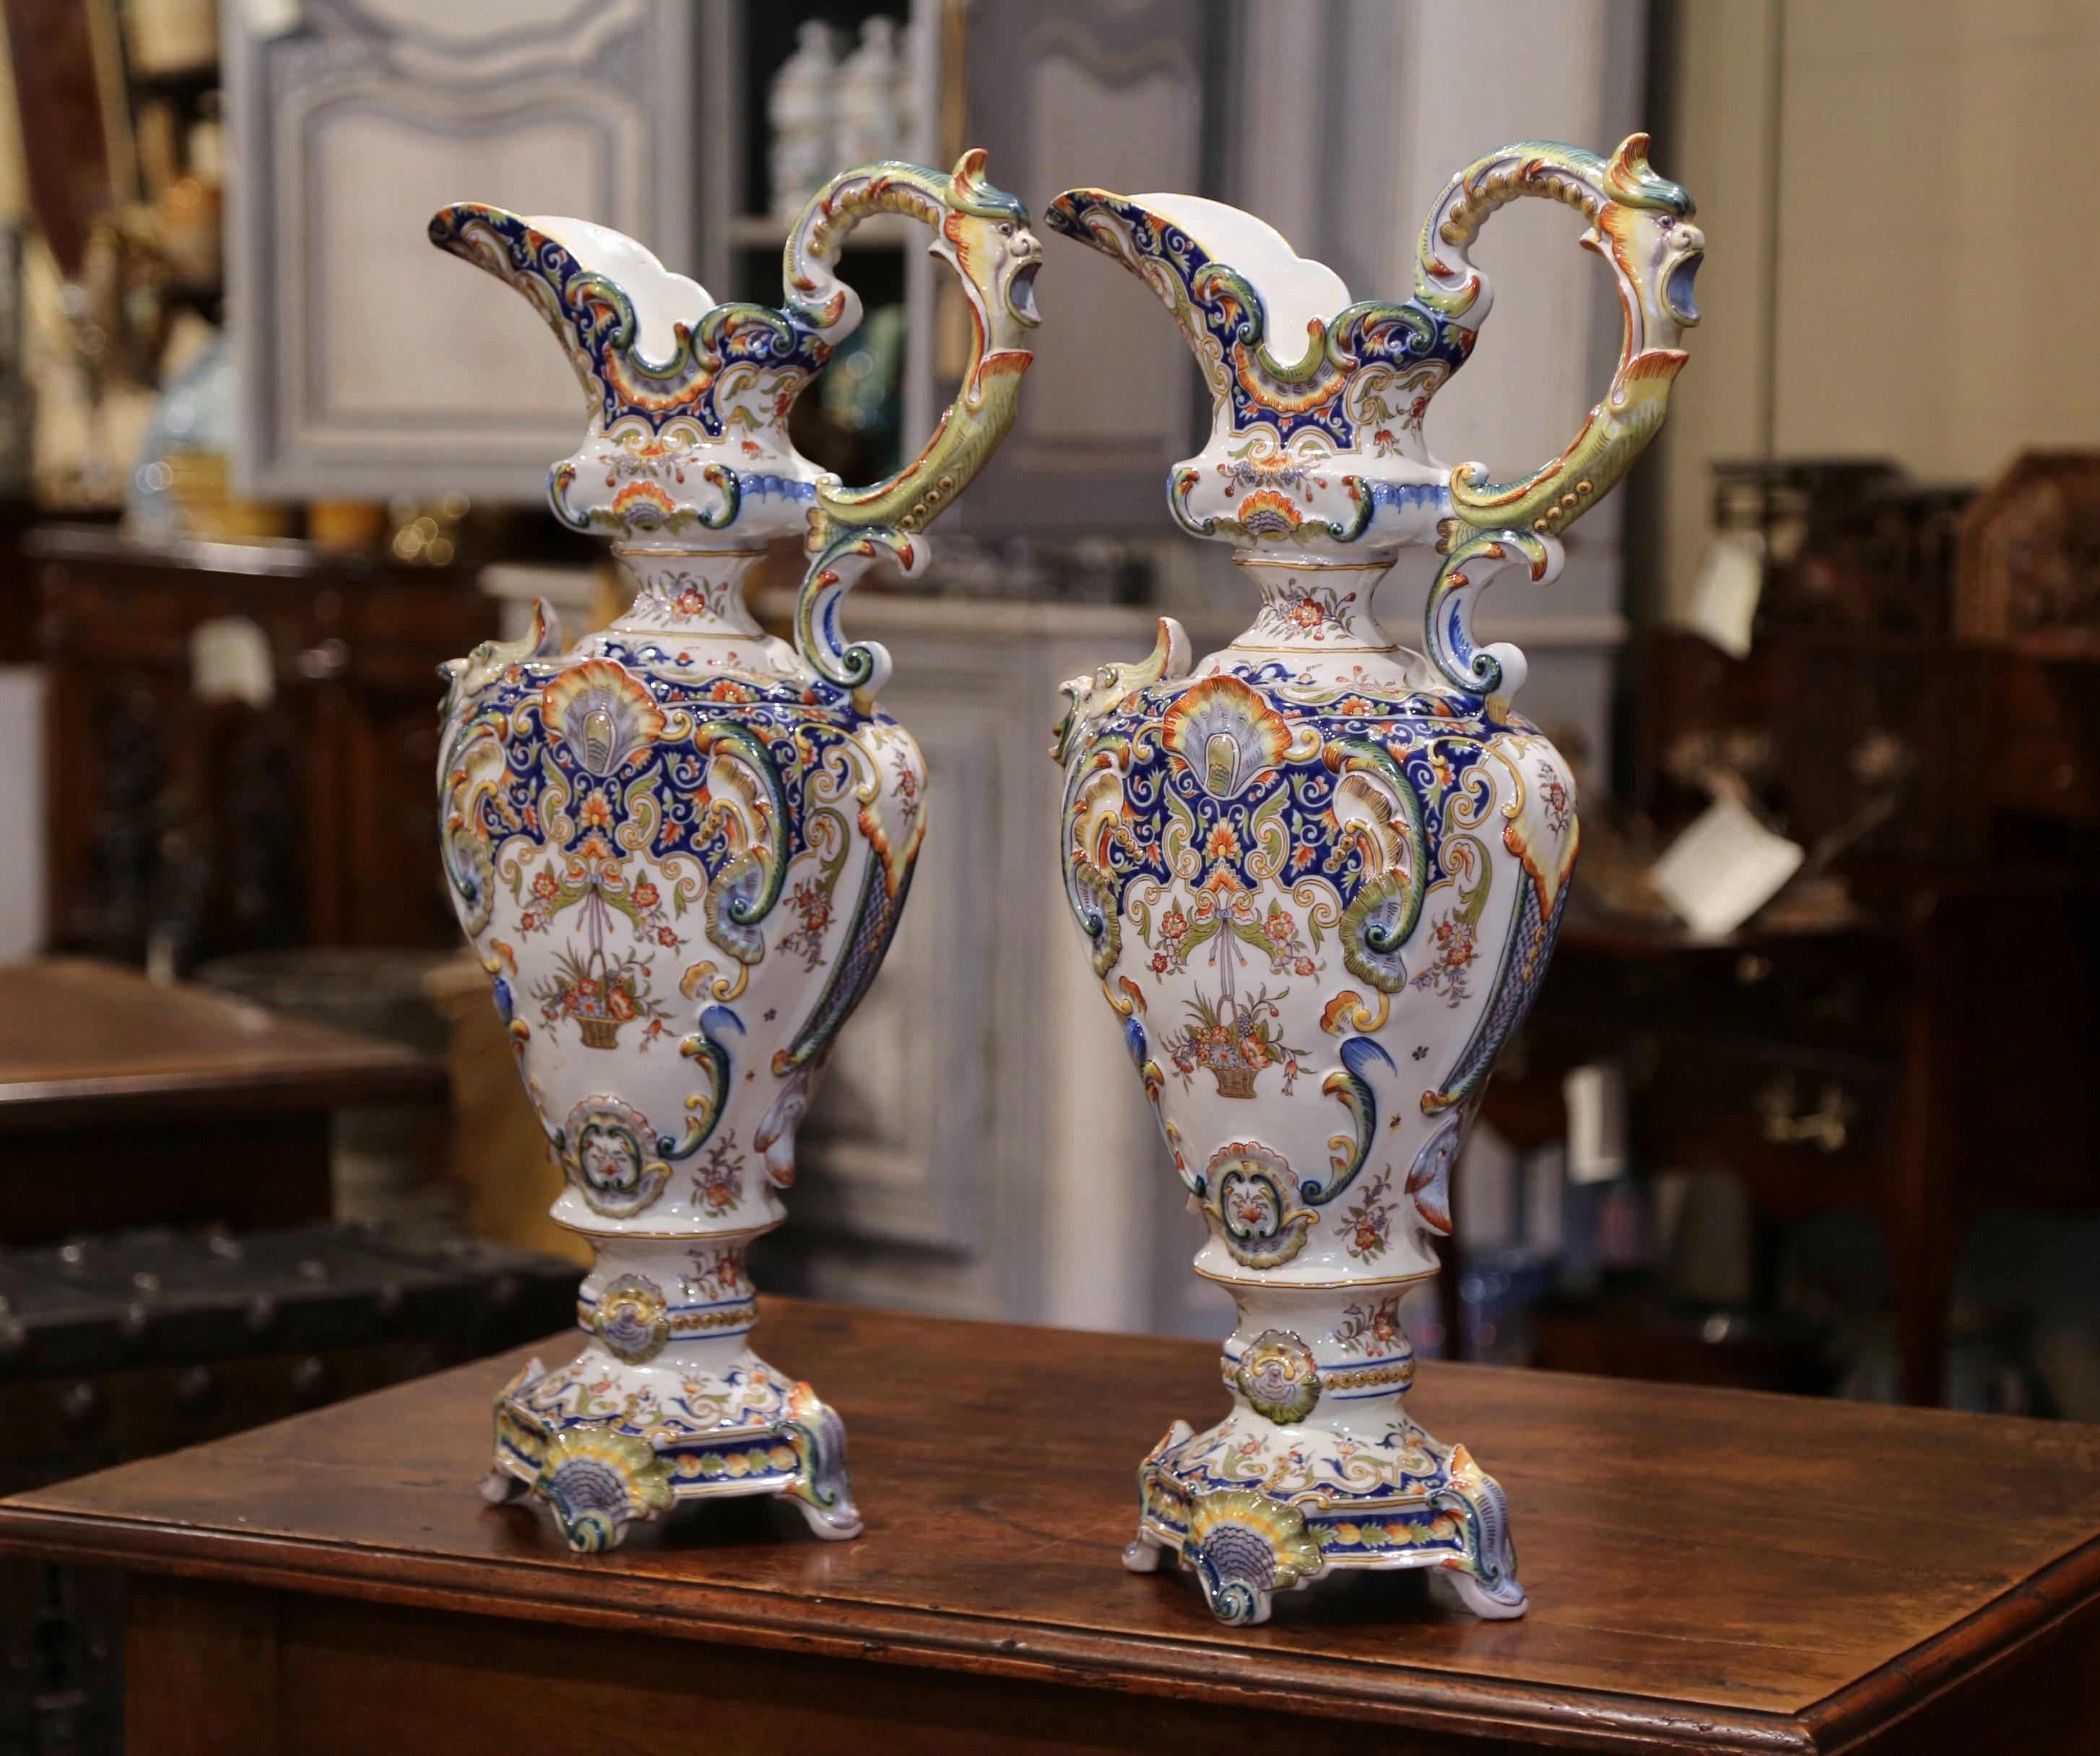 Make a statement on your mantel (fireplace) with these tall, impressive ewers. These antique 